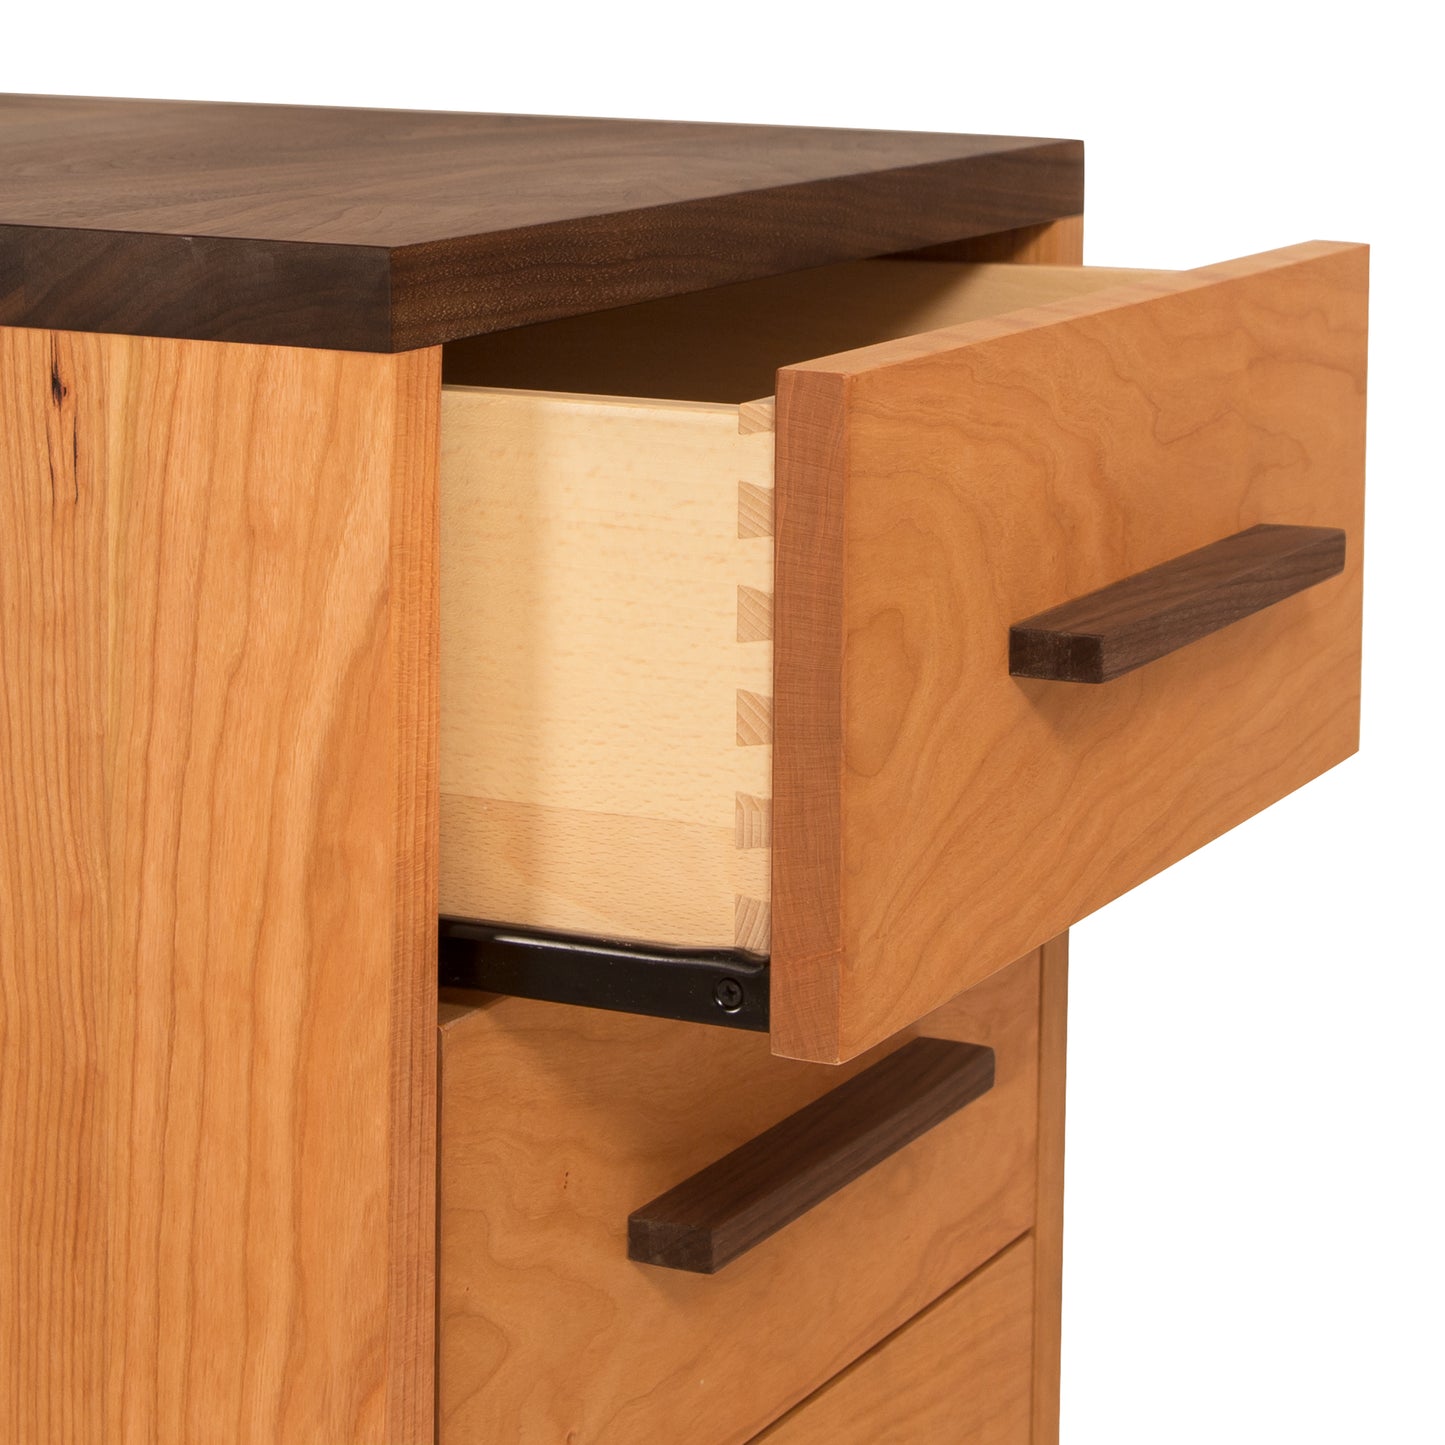 A close-up view of an open drawer in a wooden dresser, showing the dovetail joints and smooth interior, with an eco-friendly oil finish and simple rectangular handles on the Vermont Furniture Designs Modern American 3-Drawer Nightstand.